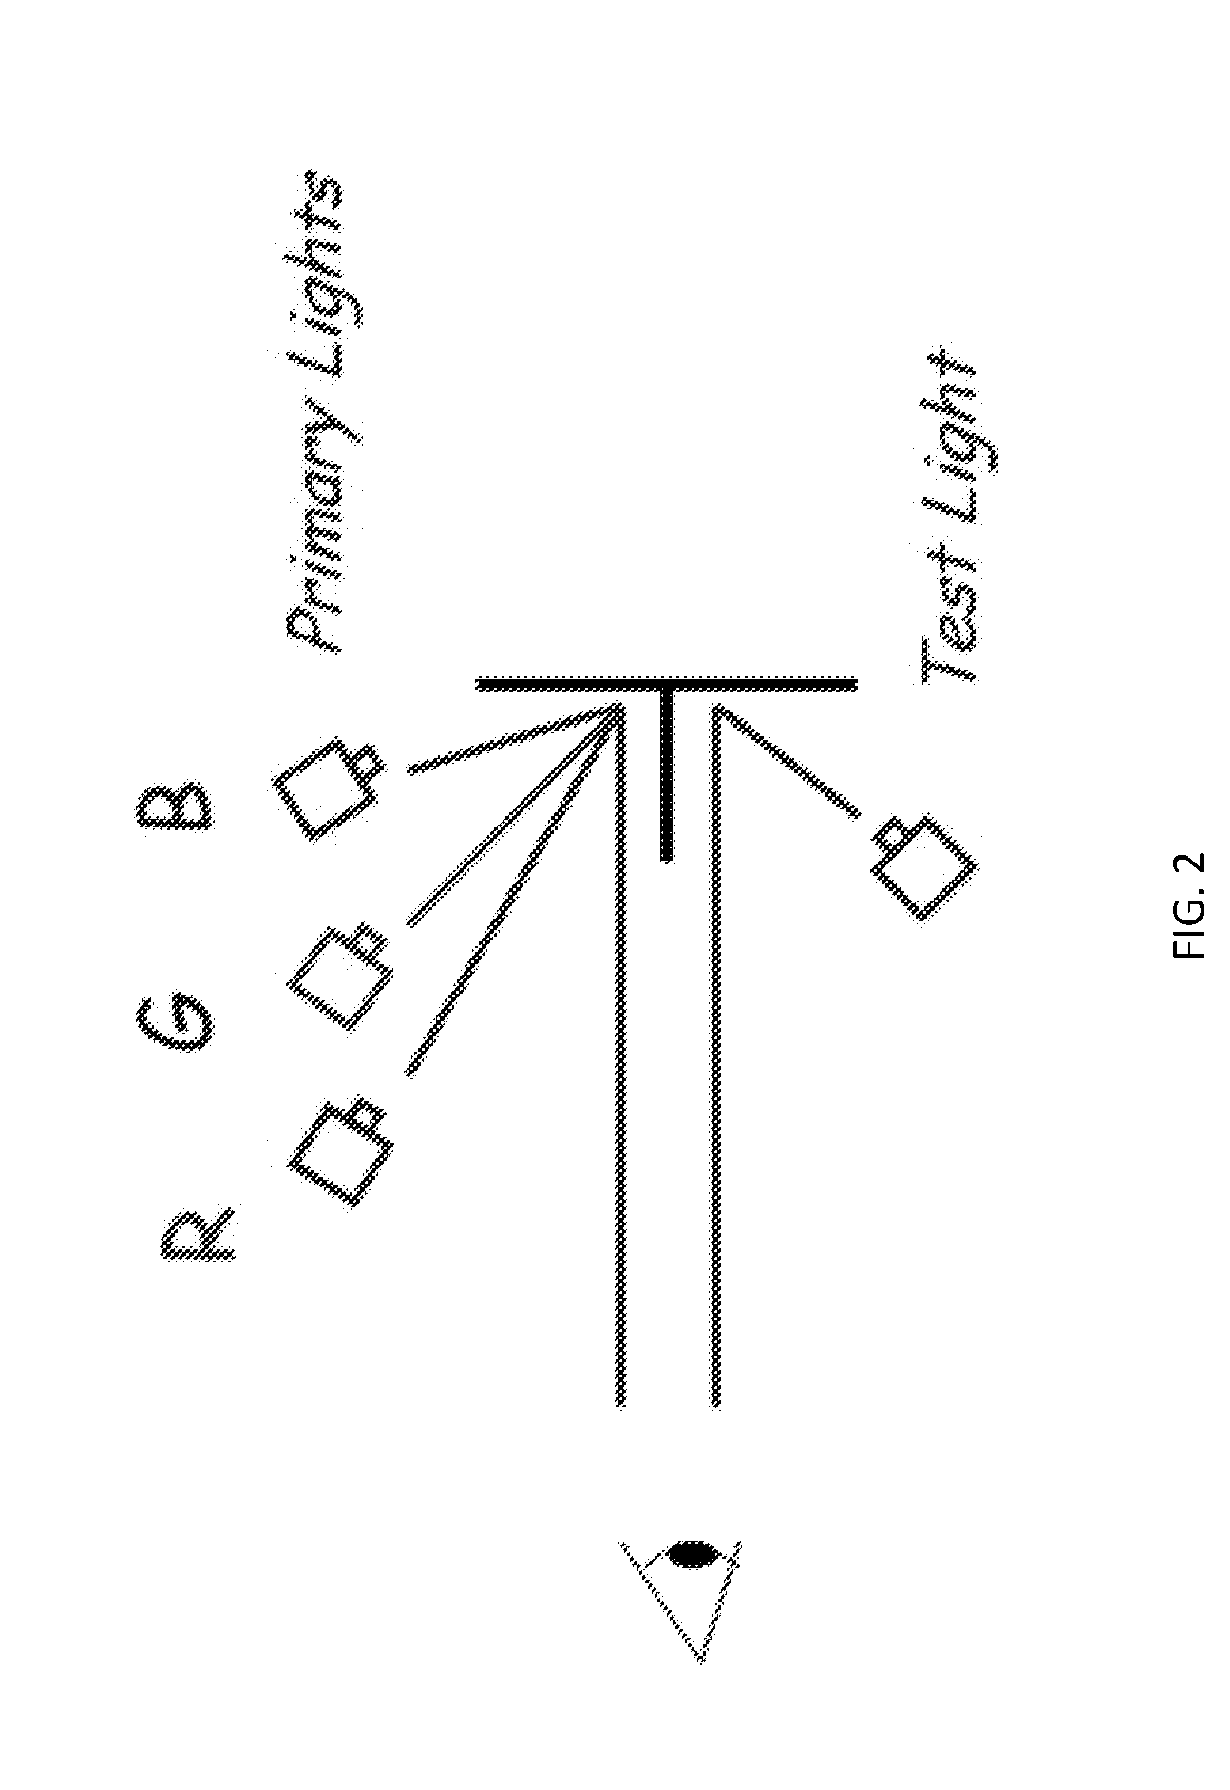 Image processing method and system